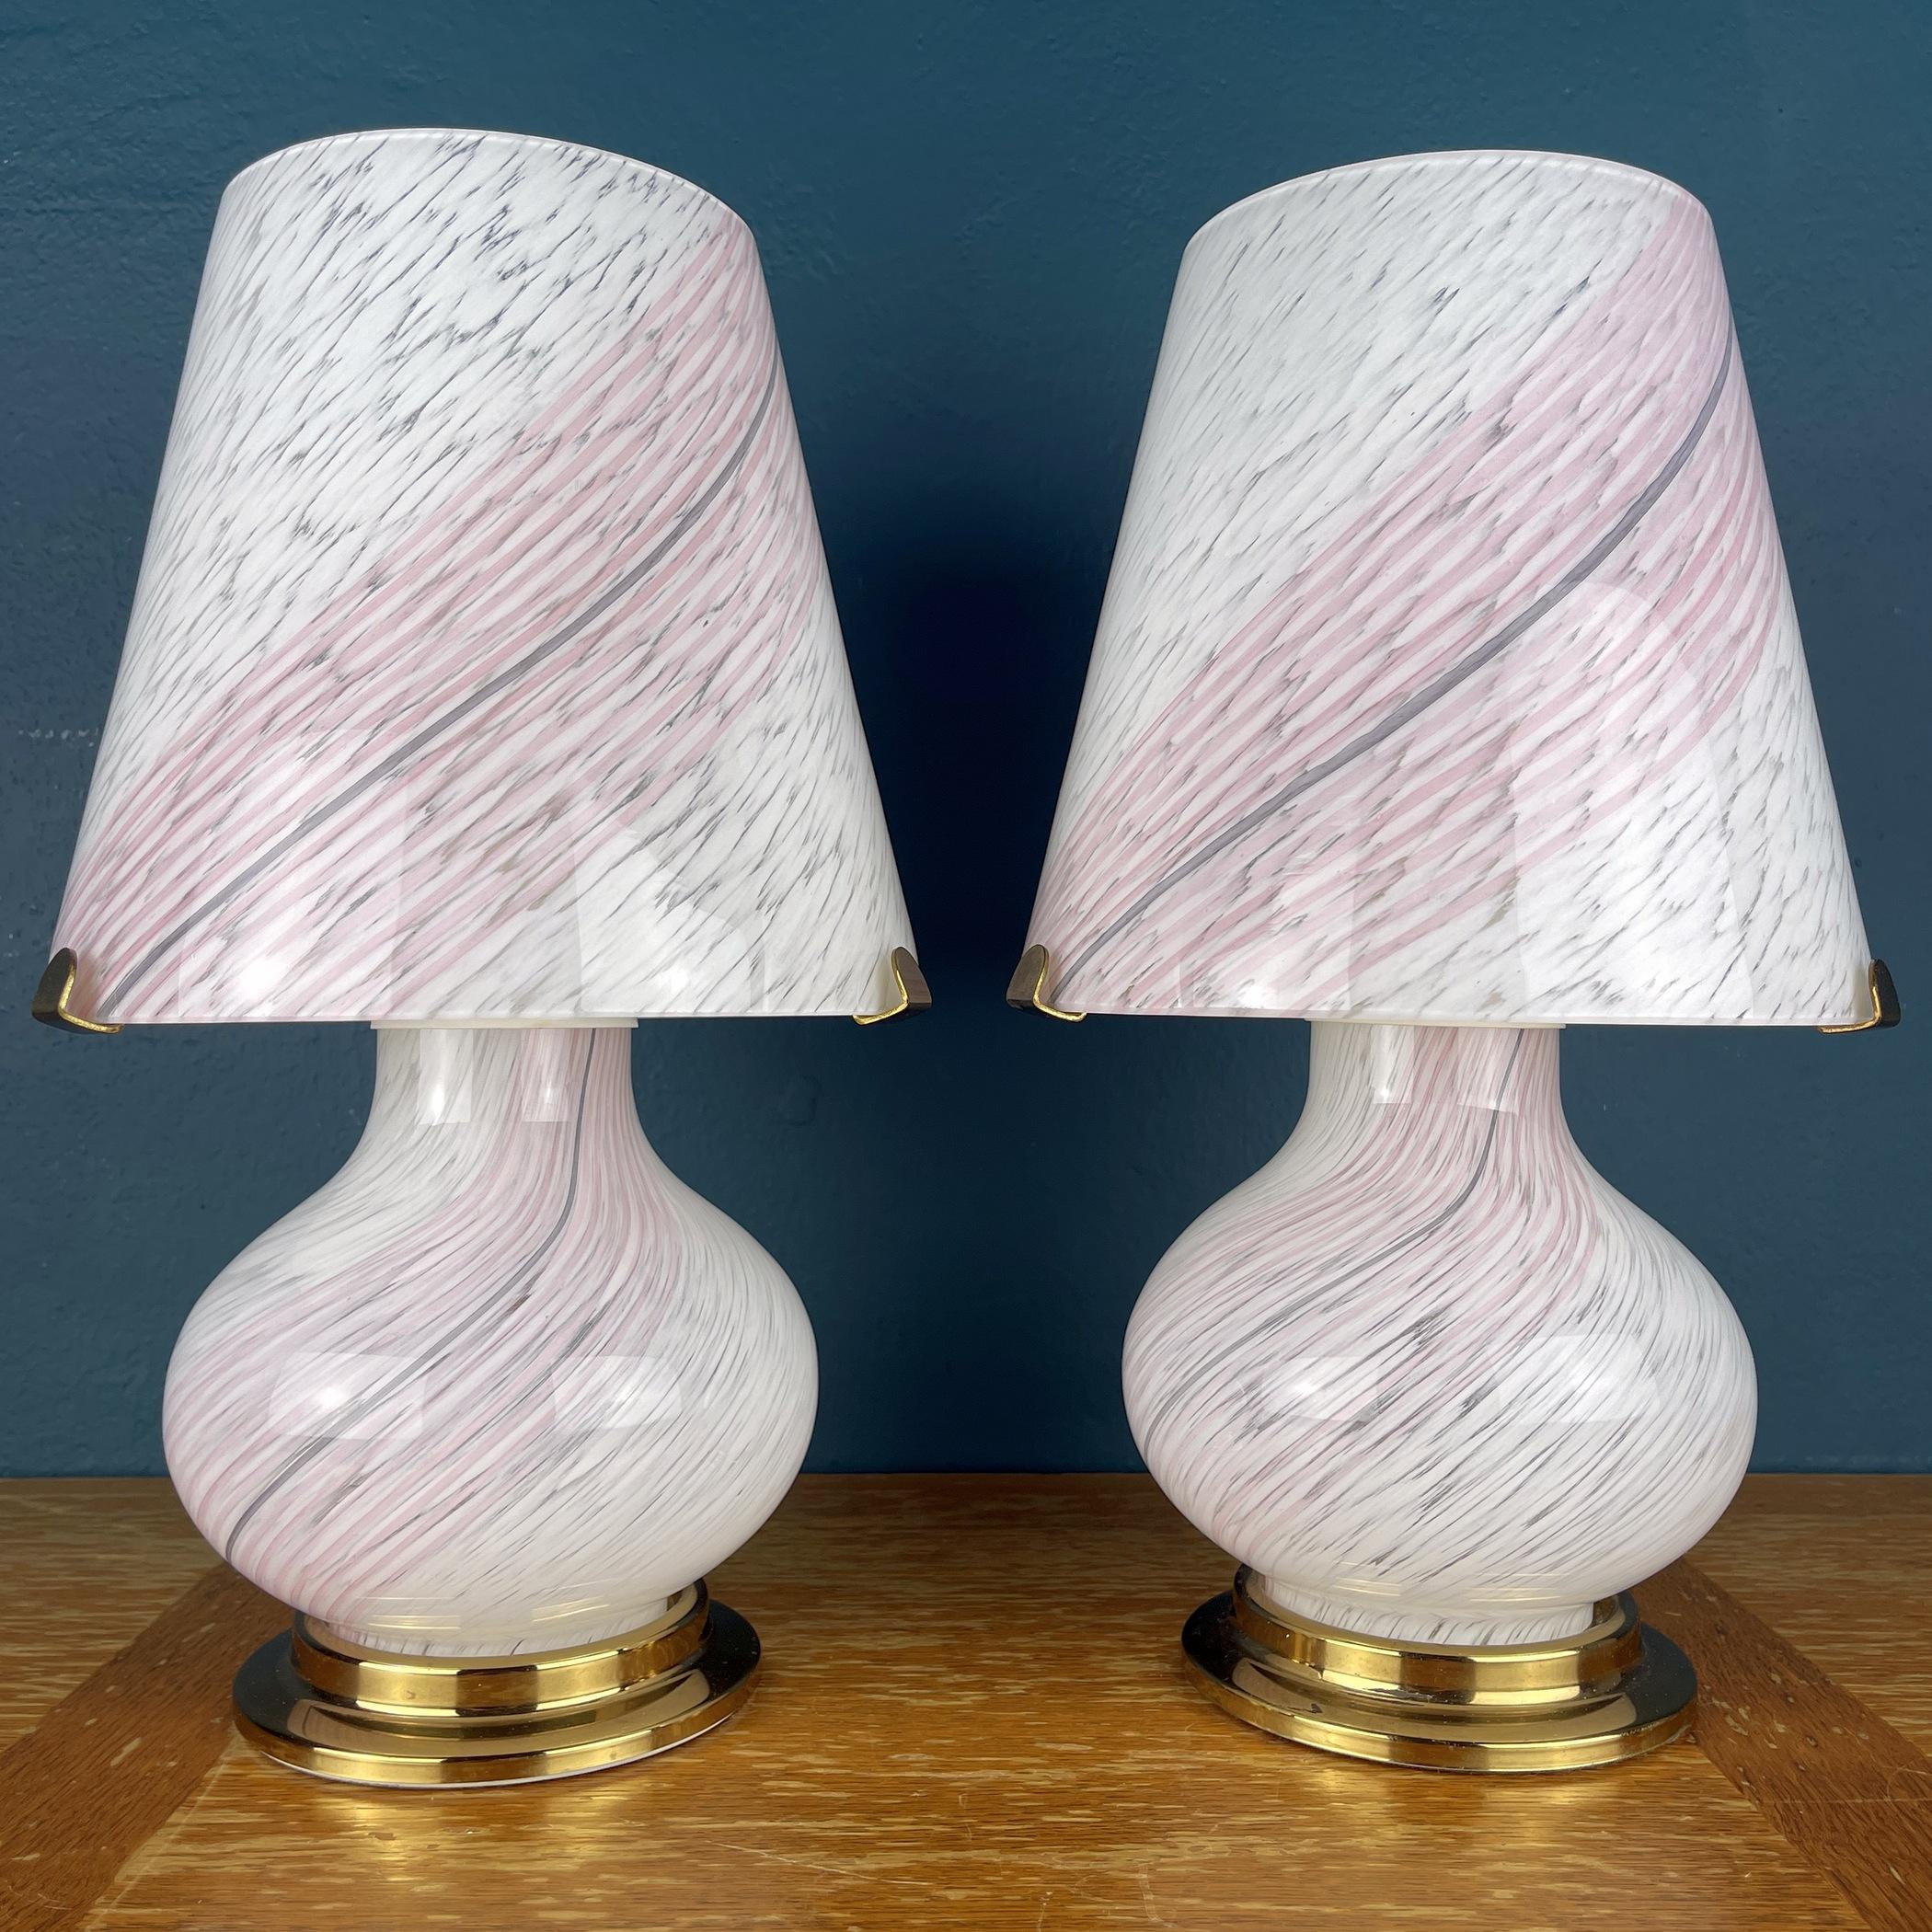 The pair of beautiful Murano mushroom lamps made in Italy in the 1970s. The beauty of the classic swirl glass makes these lamps a pleasure to look at. The elegantly shaped base carries a sturdy metal bracket to support the large conical lampshade.